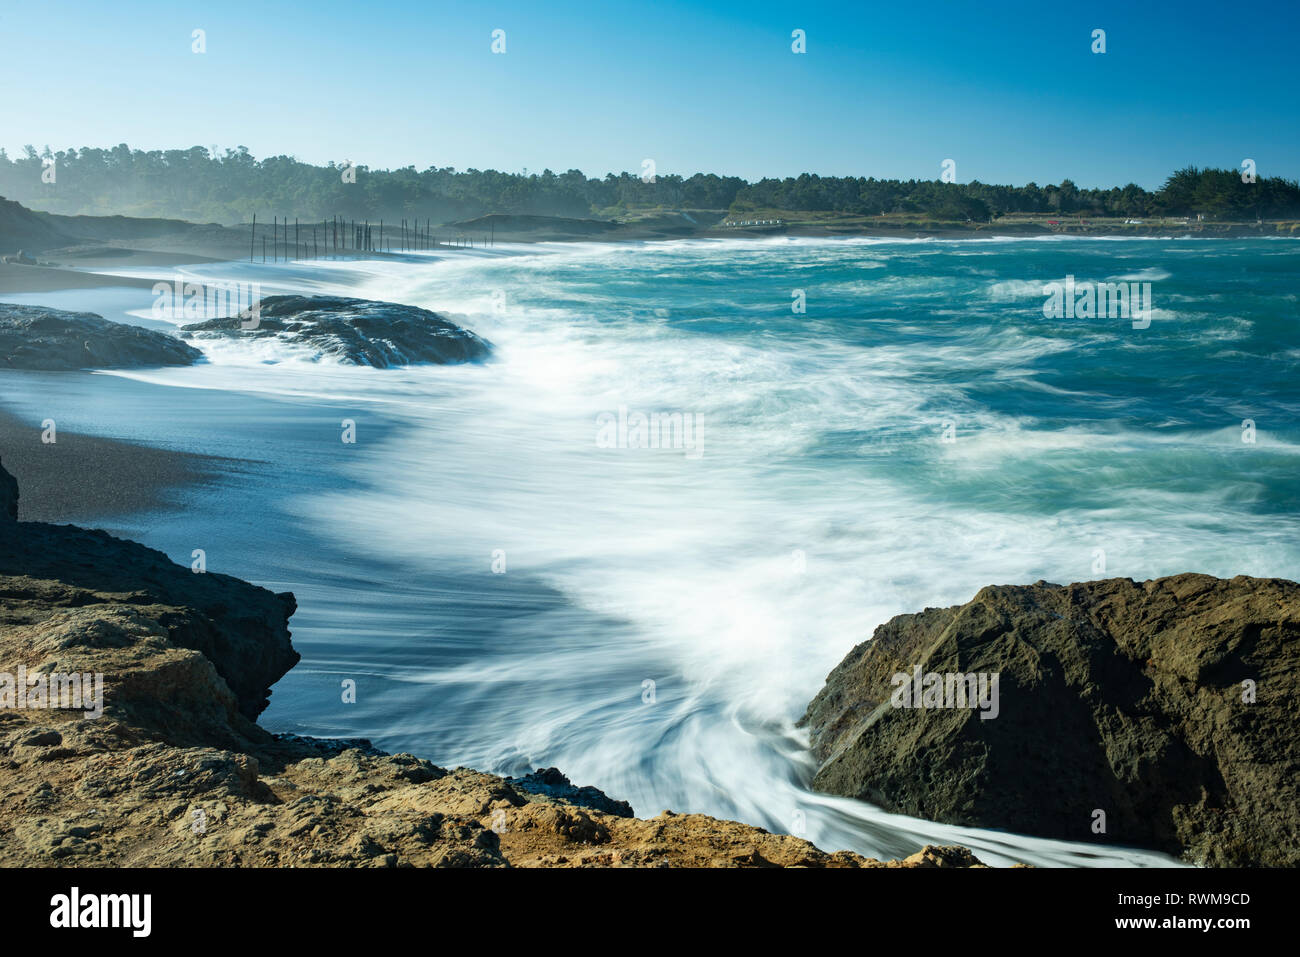 Waves softened by a long exposure surge onto the beach at MacKerricher State Park and Marine Conservation Area near Cleone in Northern California Stock Photo